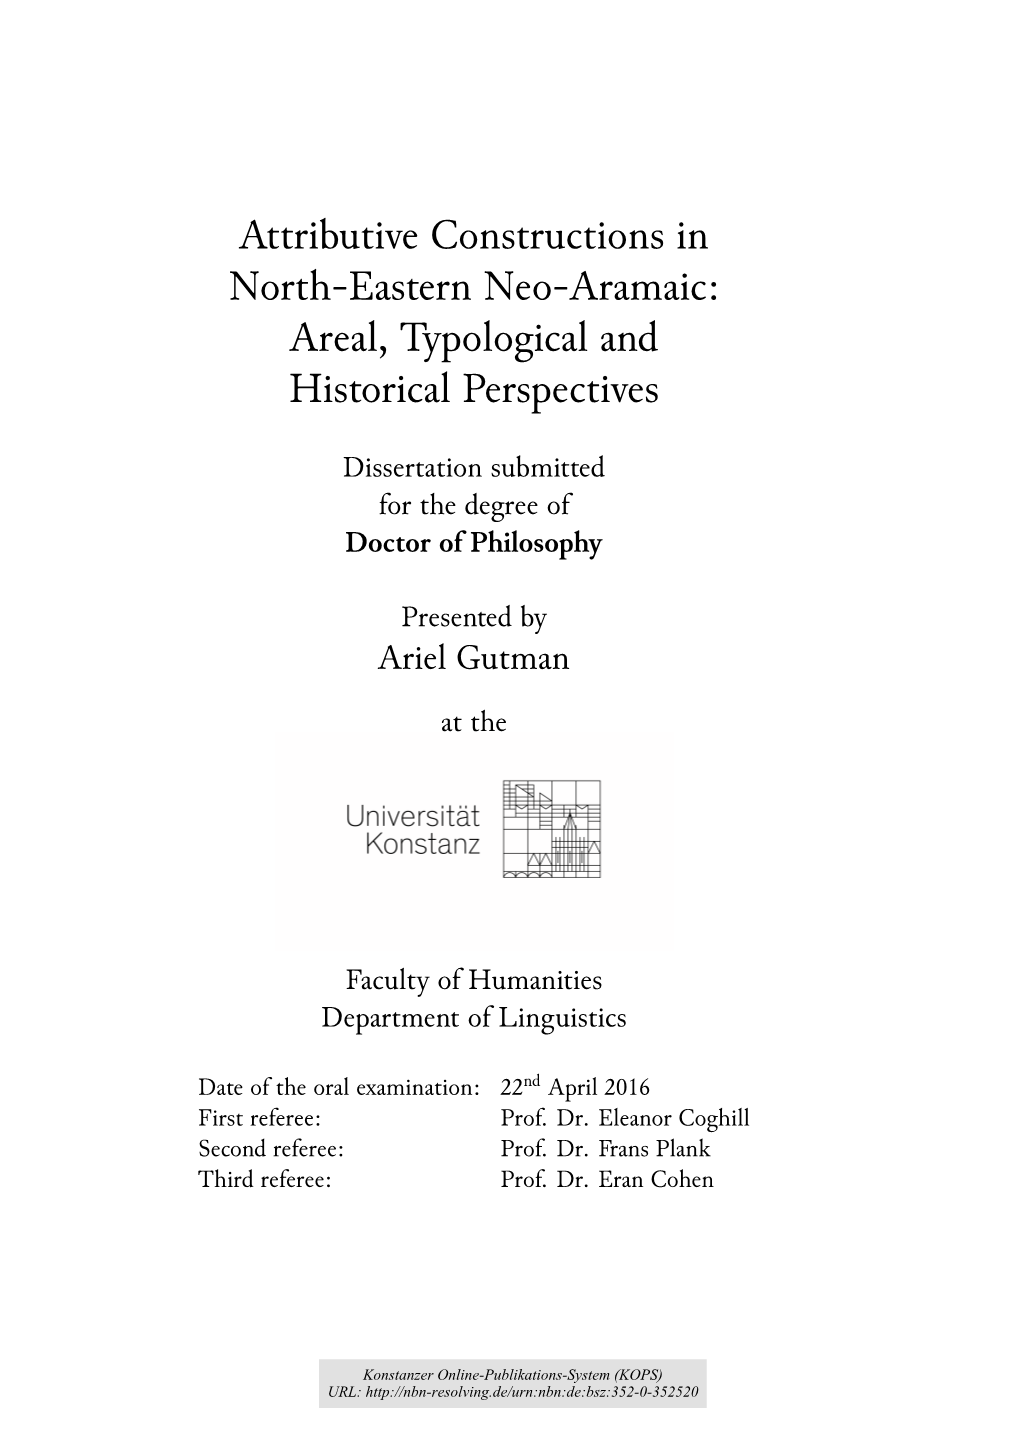 Attributive Constructions in North-Eastern Neo-Aramaic: Areal, Typological and Historical Perspectives